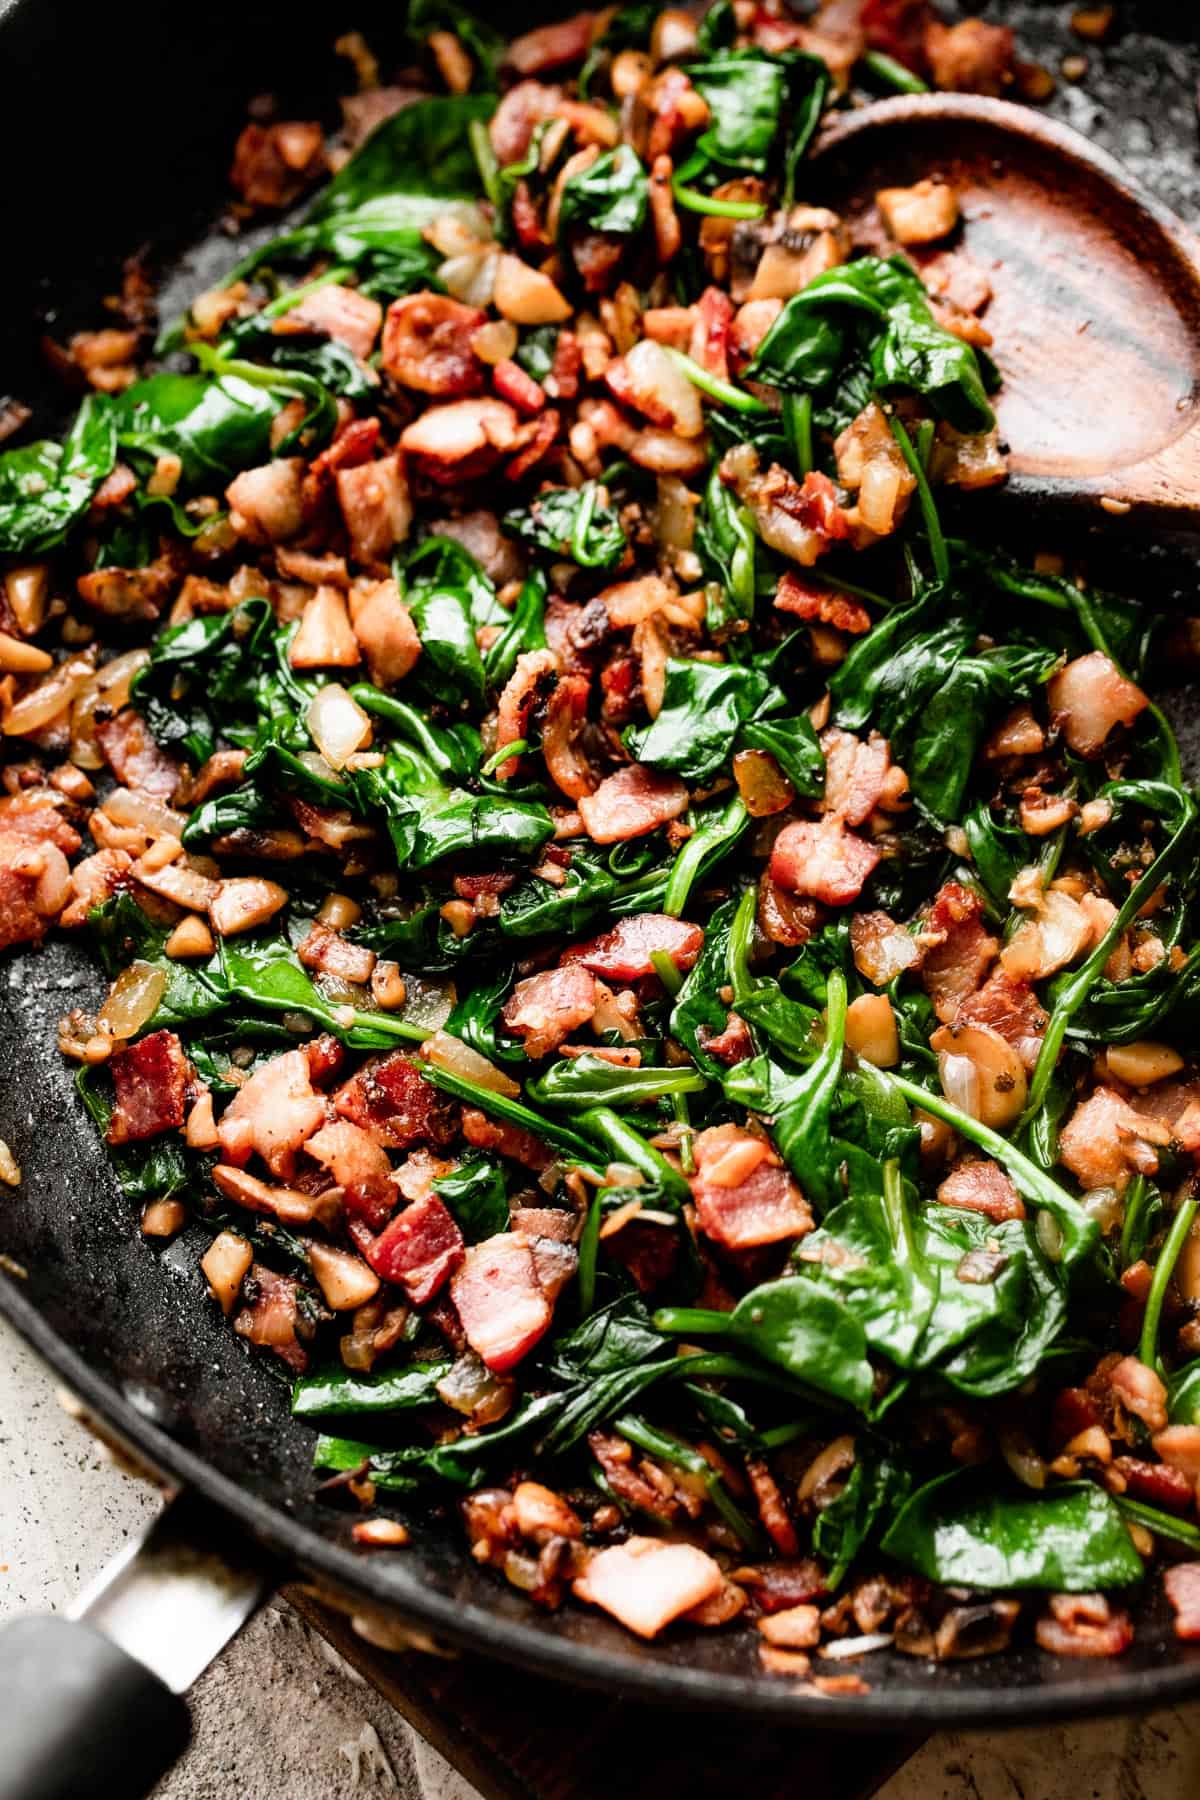 cooking diced bacon, chopped mushrooms, and baby spinach in a black skillet.